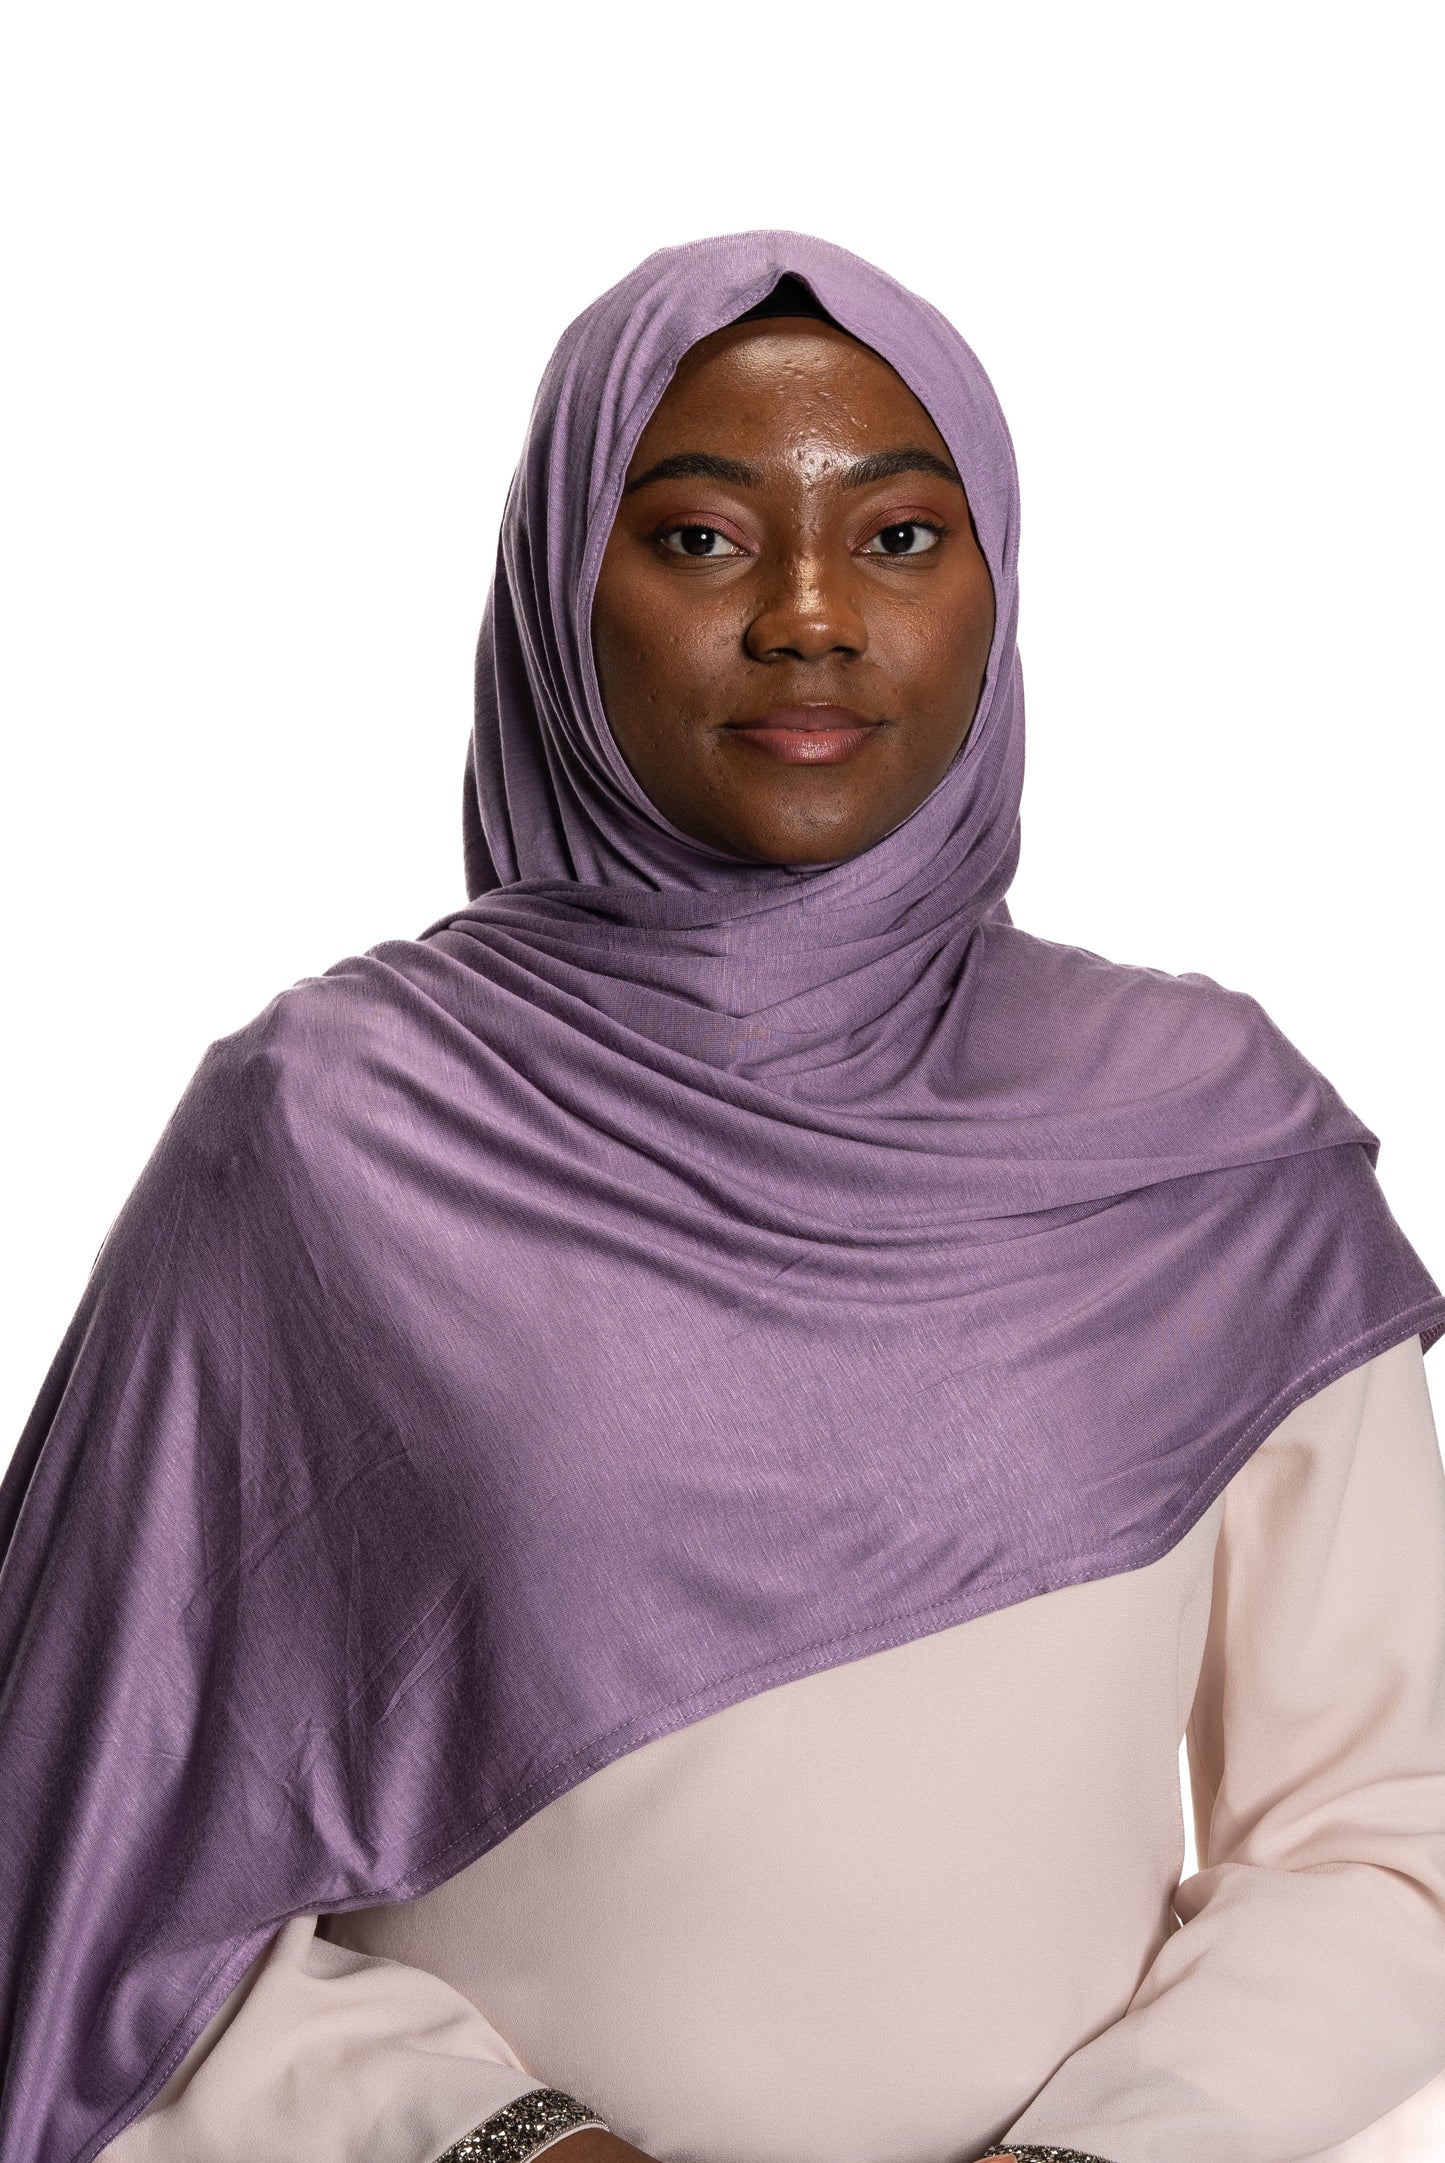 Jolie Nisa Hijab Premium Slip-on Jersey Instant Head Scarf Wrap for Effortless and Stylish Hijab Wear Premium Slip-on instant Jersey Head Scarf Wrap for Effortless and Stylish Hijab Wear!